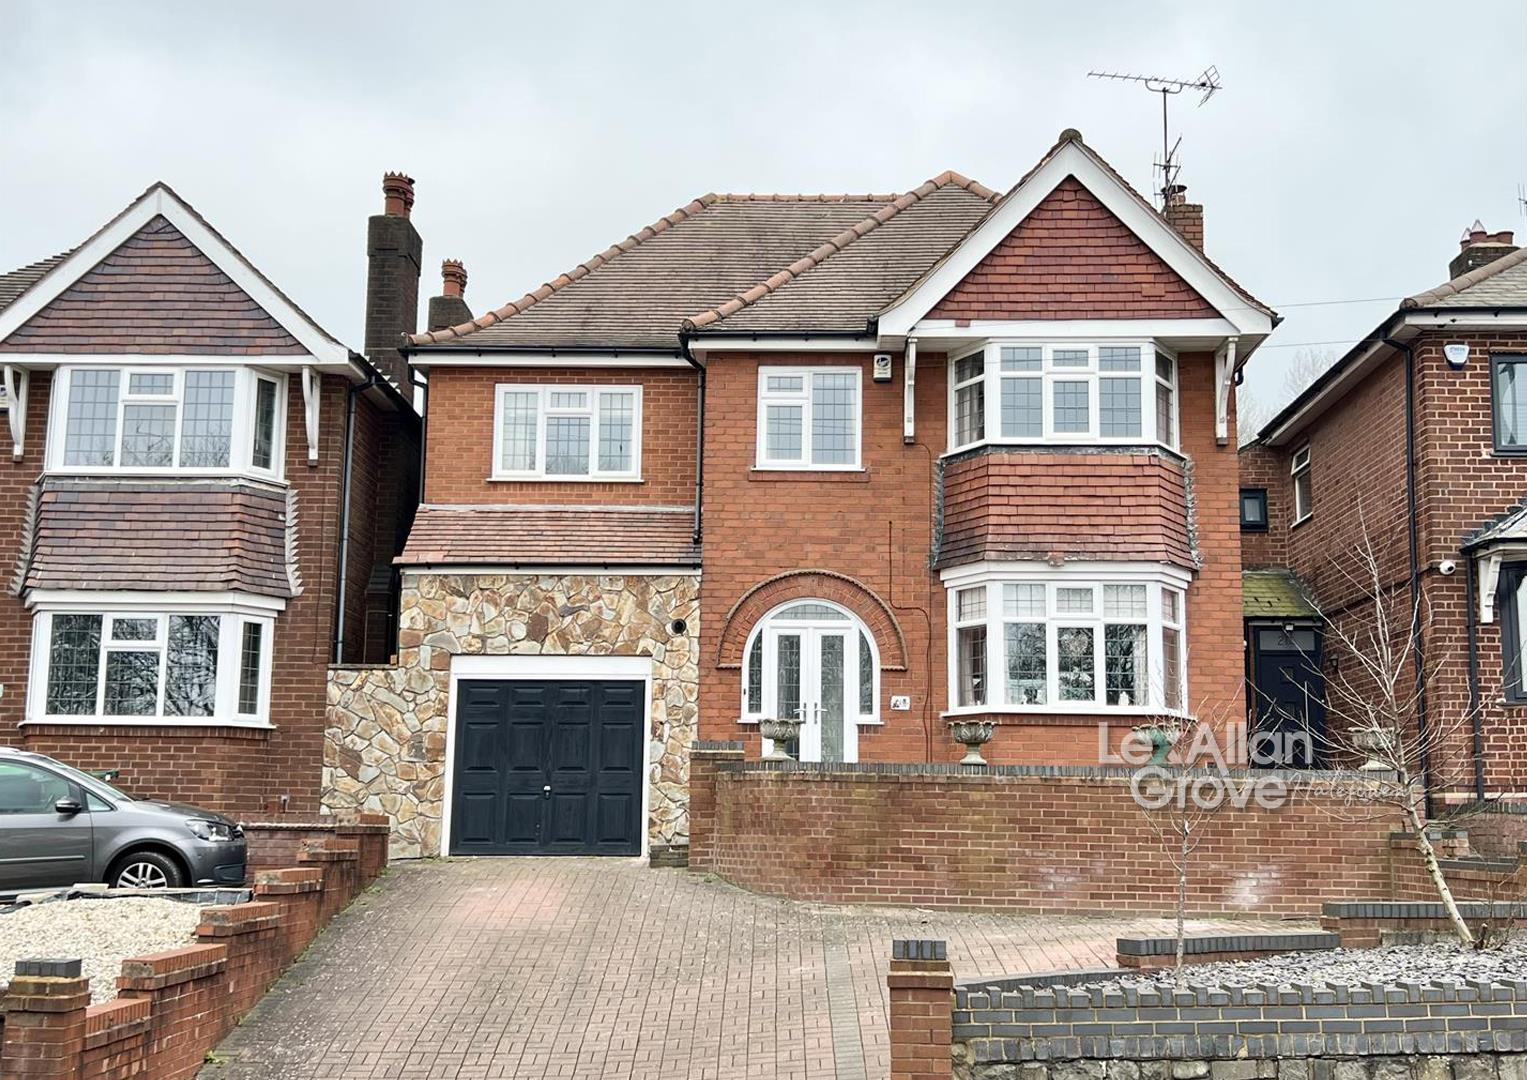 4 bed detached house for sale in Dudley Road, Rowley Regis - Property Image 1